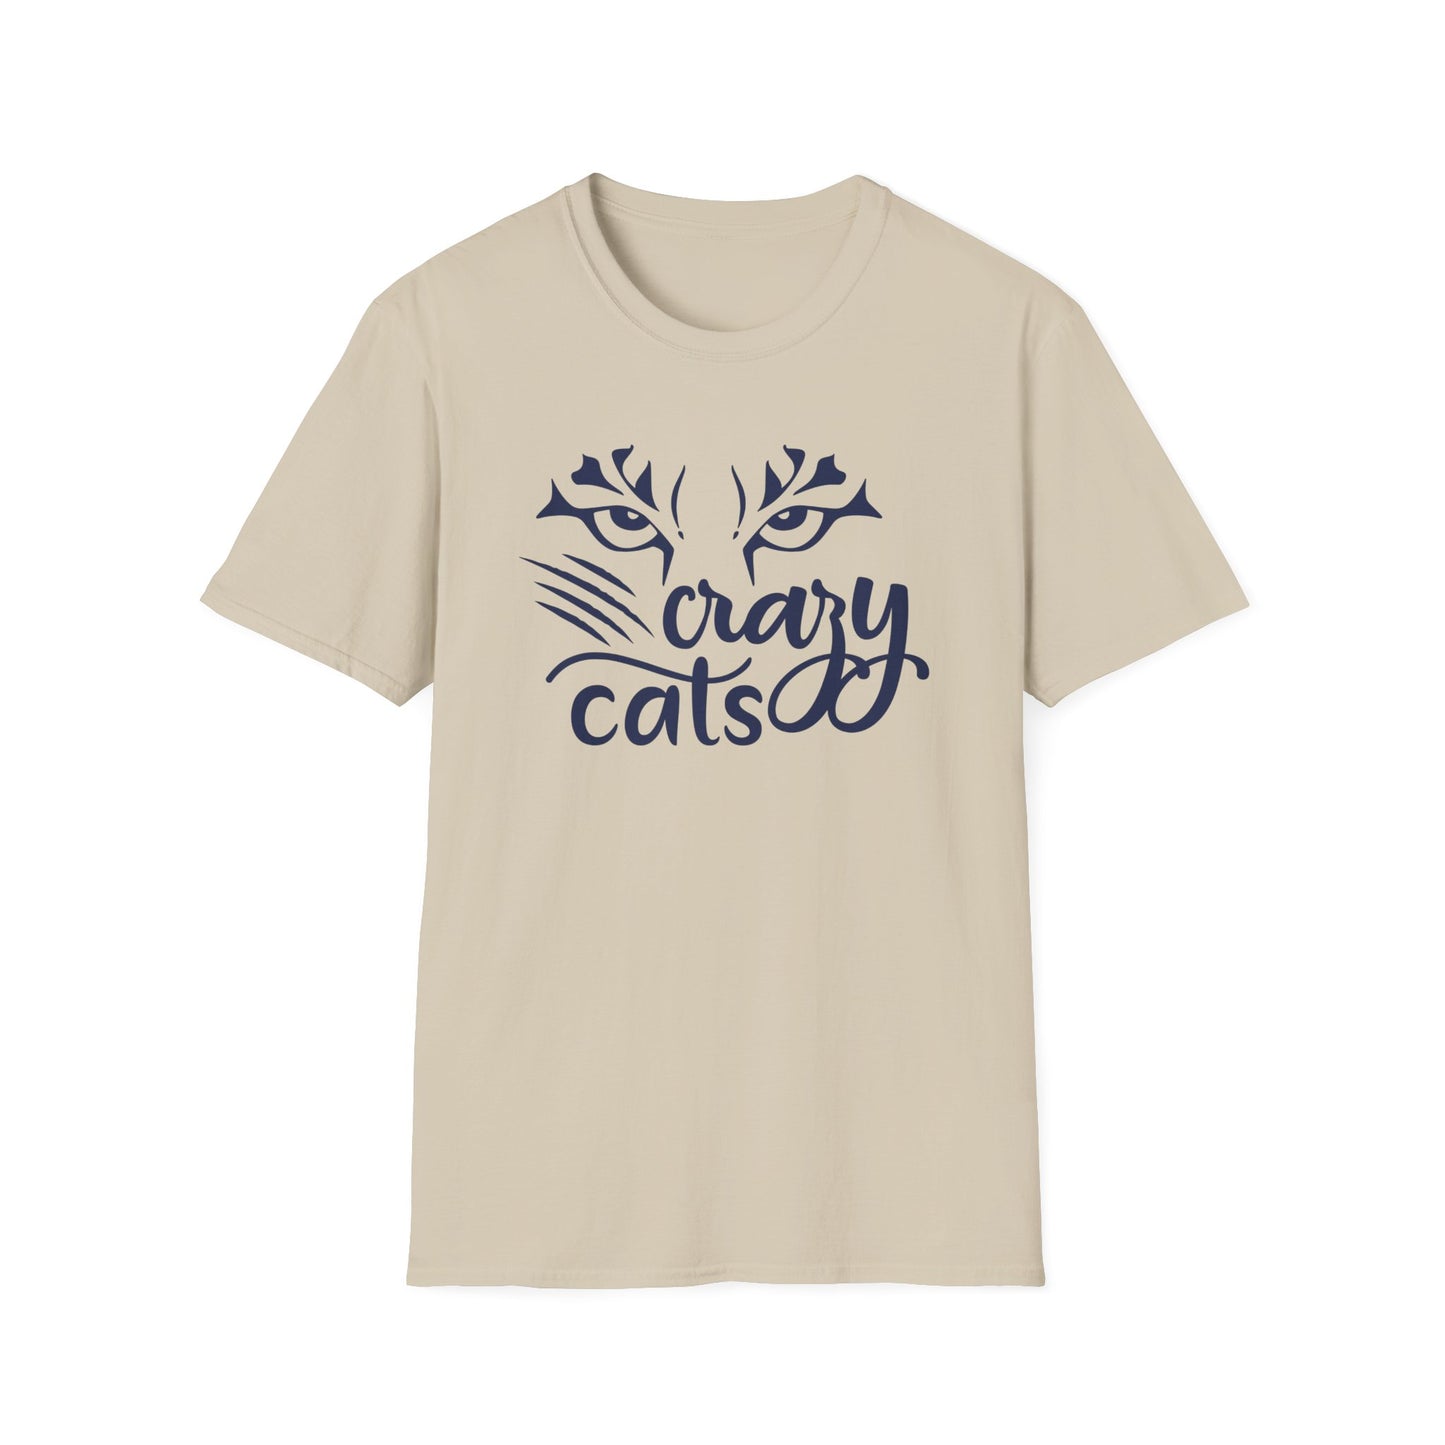 Crazy Cats Collection- Limited Edition Designs!